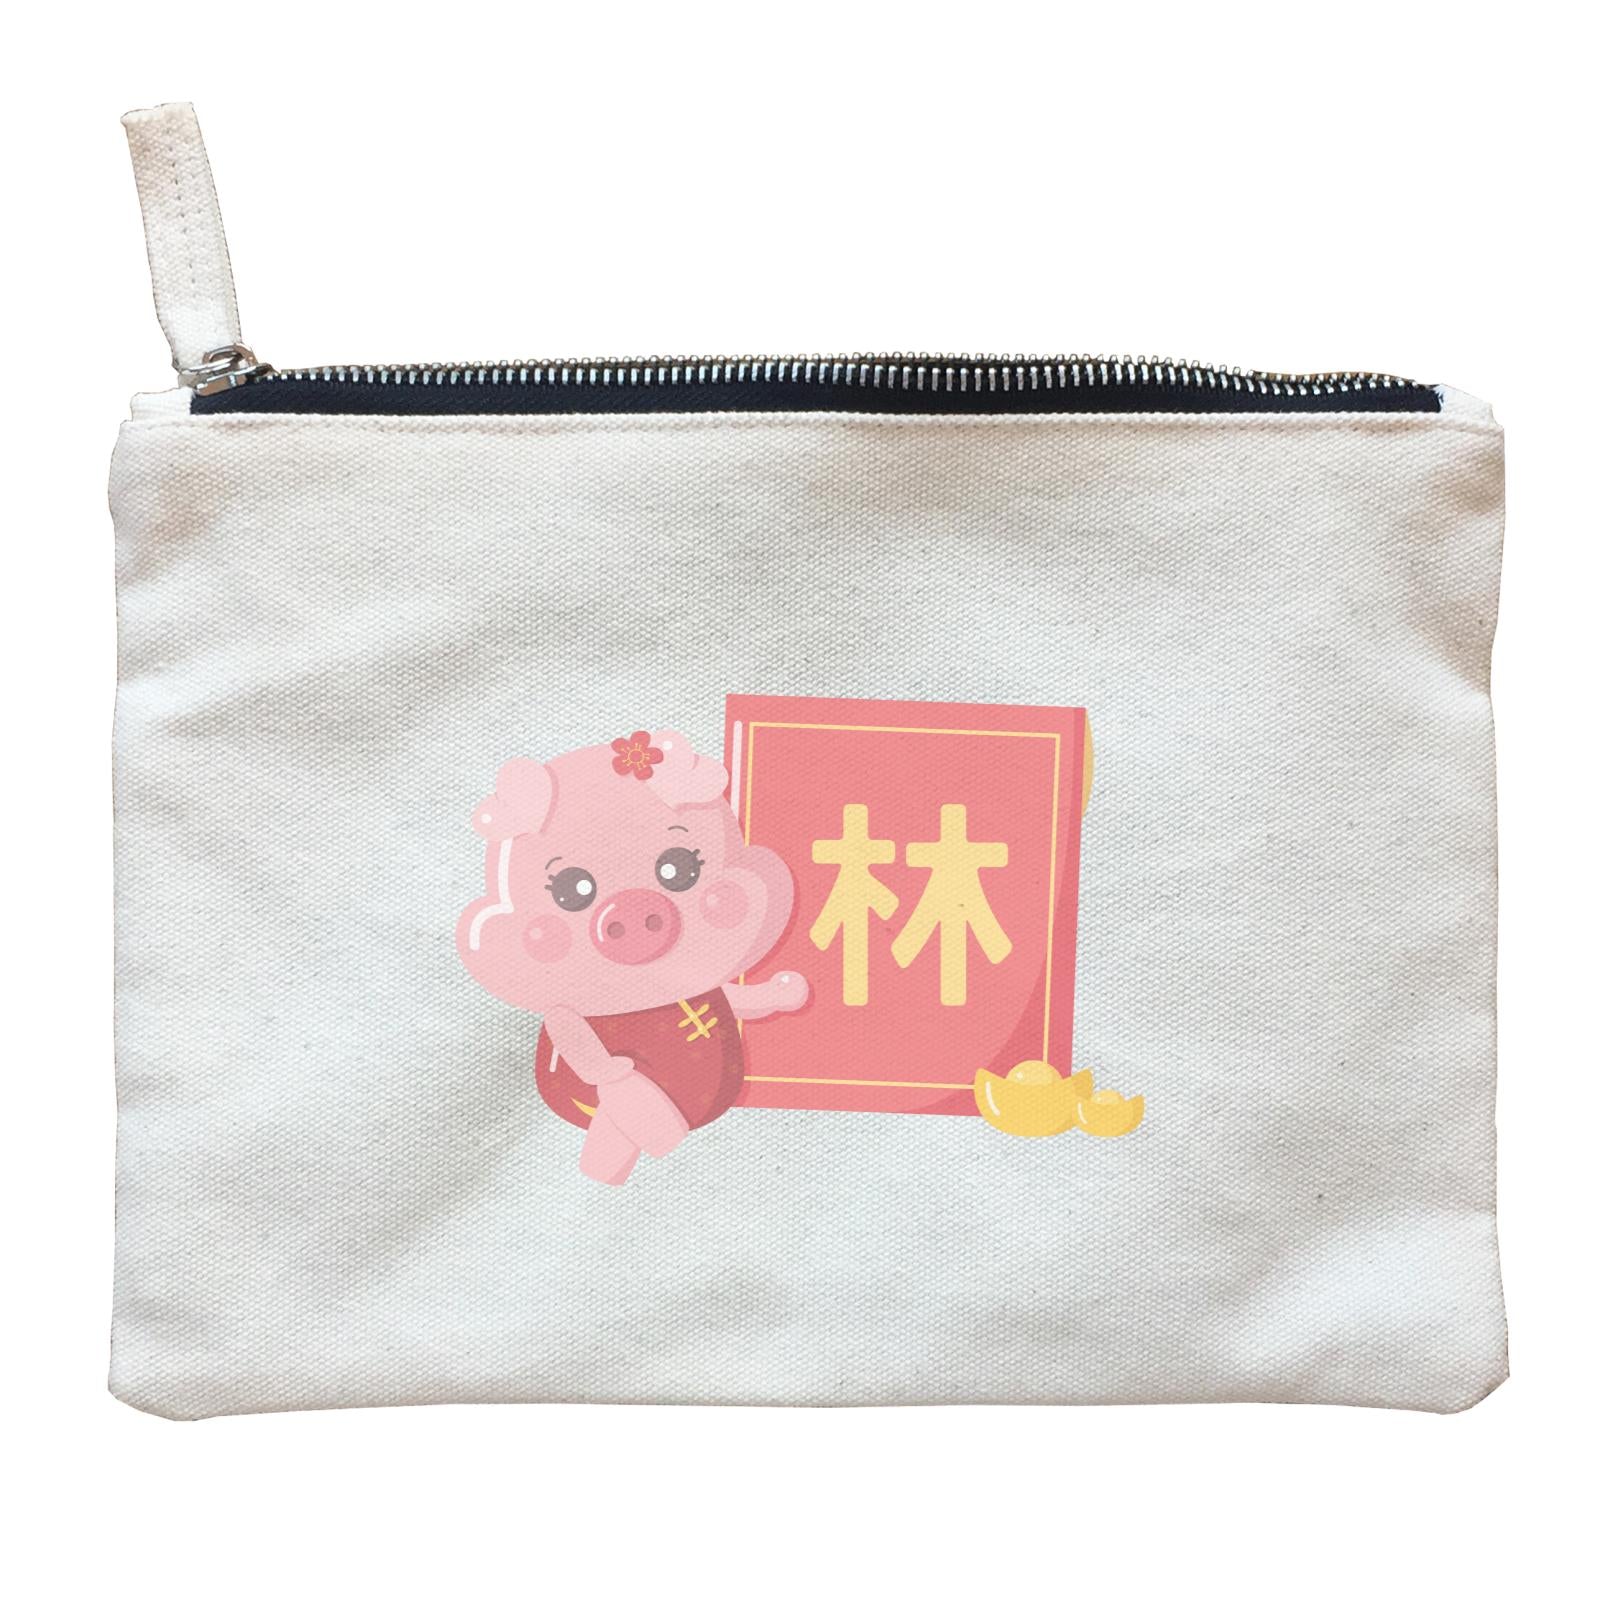 Chinese New Year Cute Pig Angpau Girl Accessories With Addname Zipper Pouch